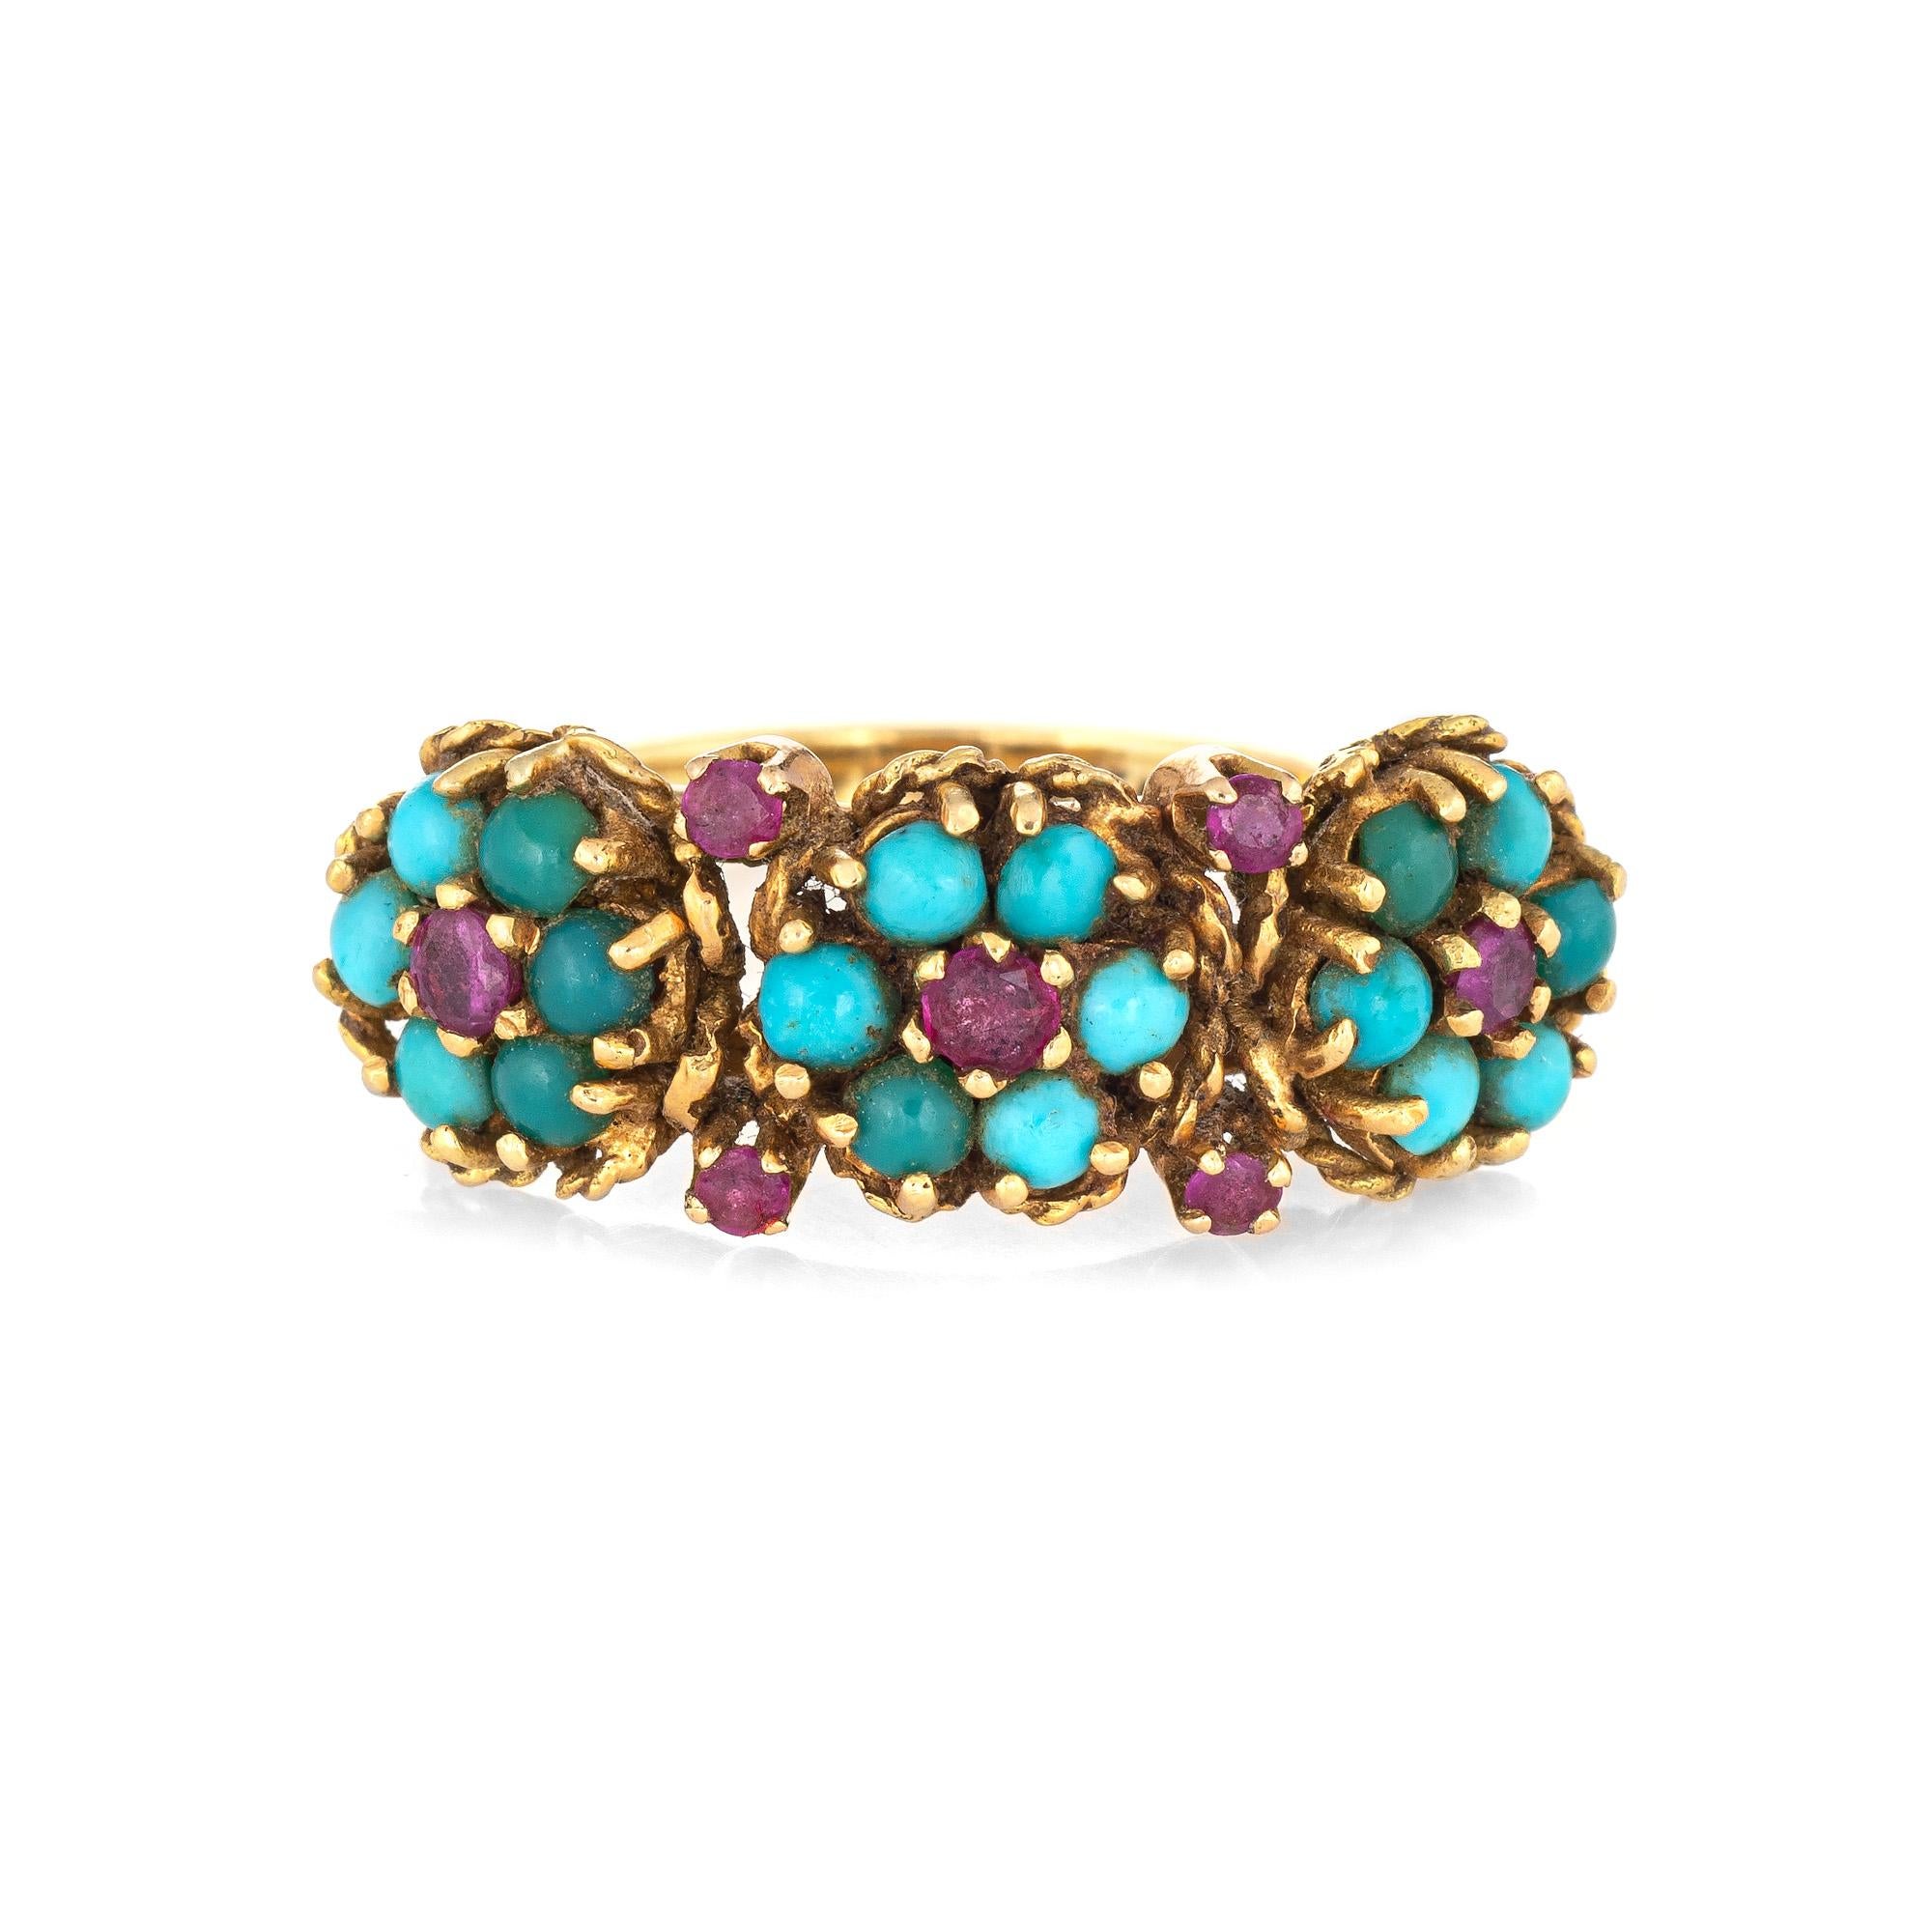 Stylish vintage turquoise & ruby ring (circa 1960s) crafted in 18 karat yellow gold. 

Turquoise cabochons each measure 2.5mm, accented with 7 rubies that total an estimated 0.22 carats. The turquoise does show some discoloration from age.  

The